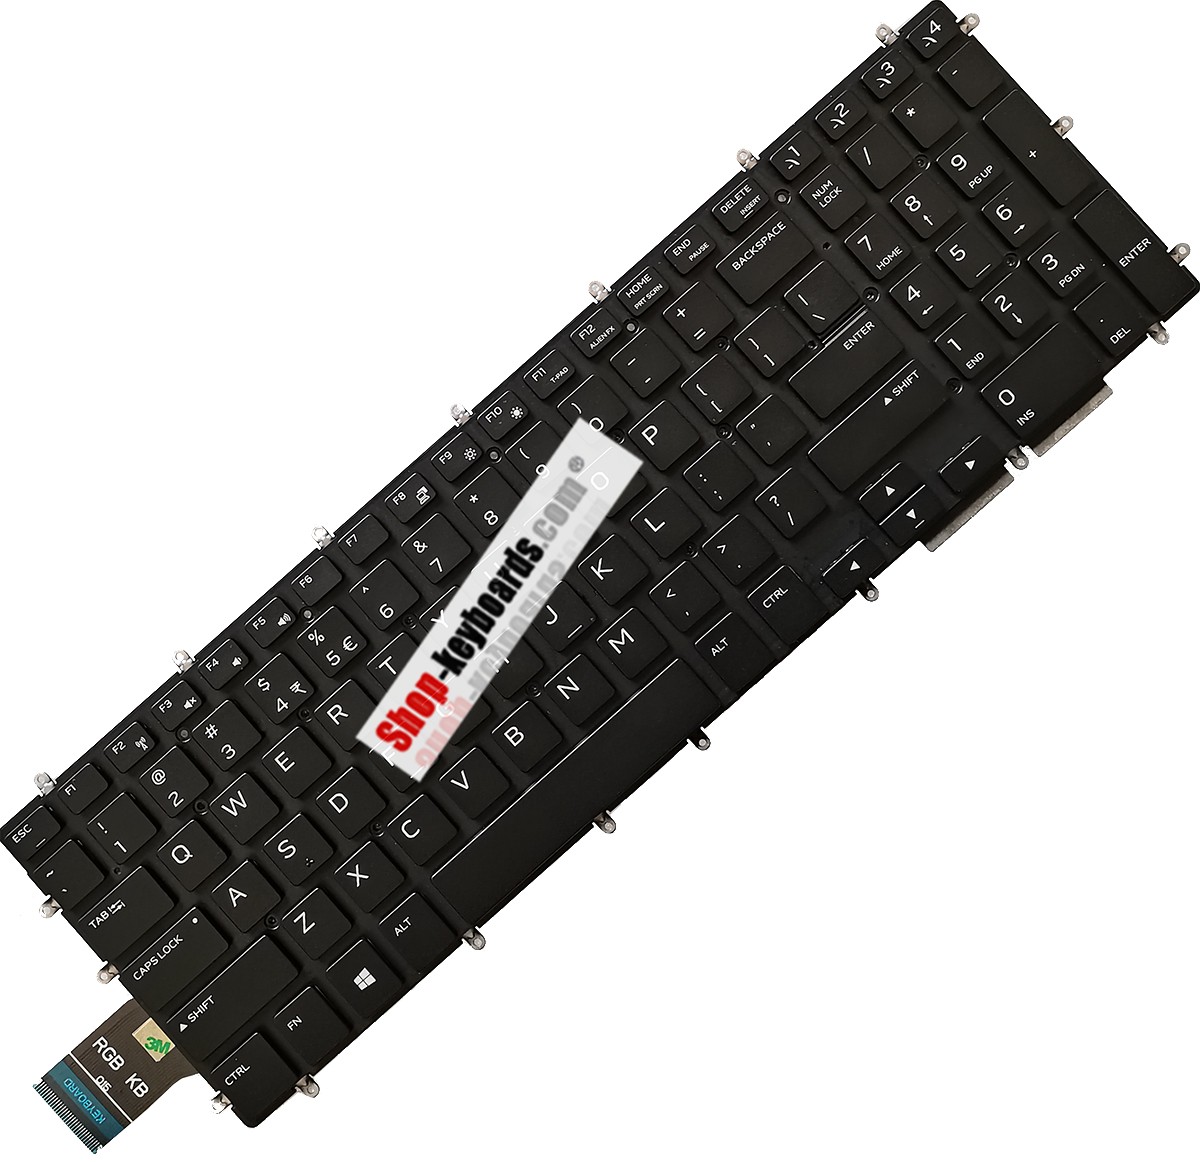 Dell 0KN4-0D1ND12 Keyboard replacement